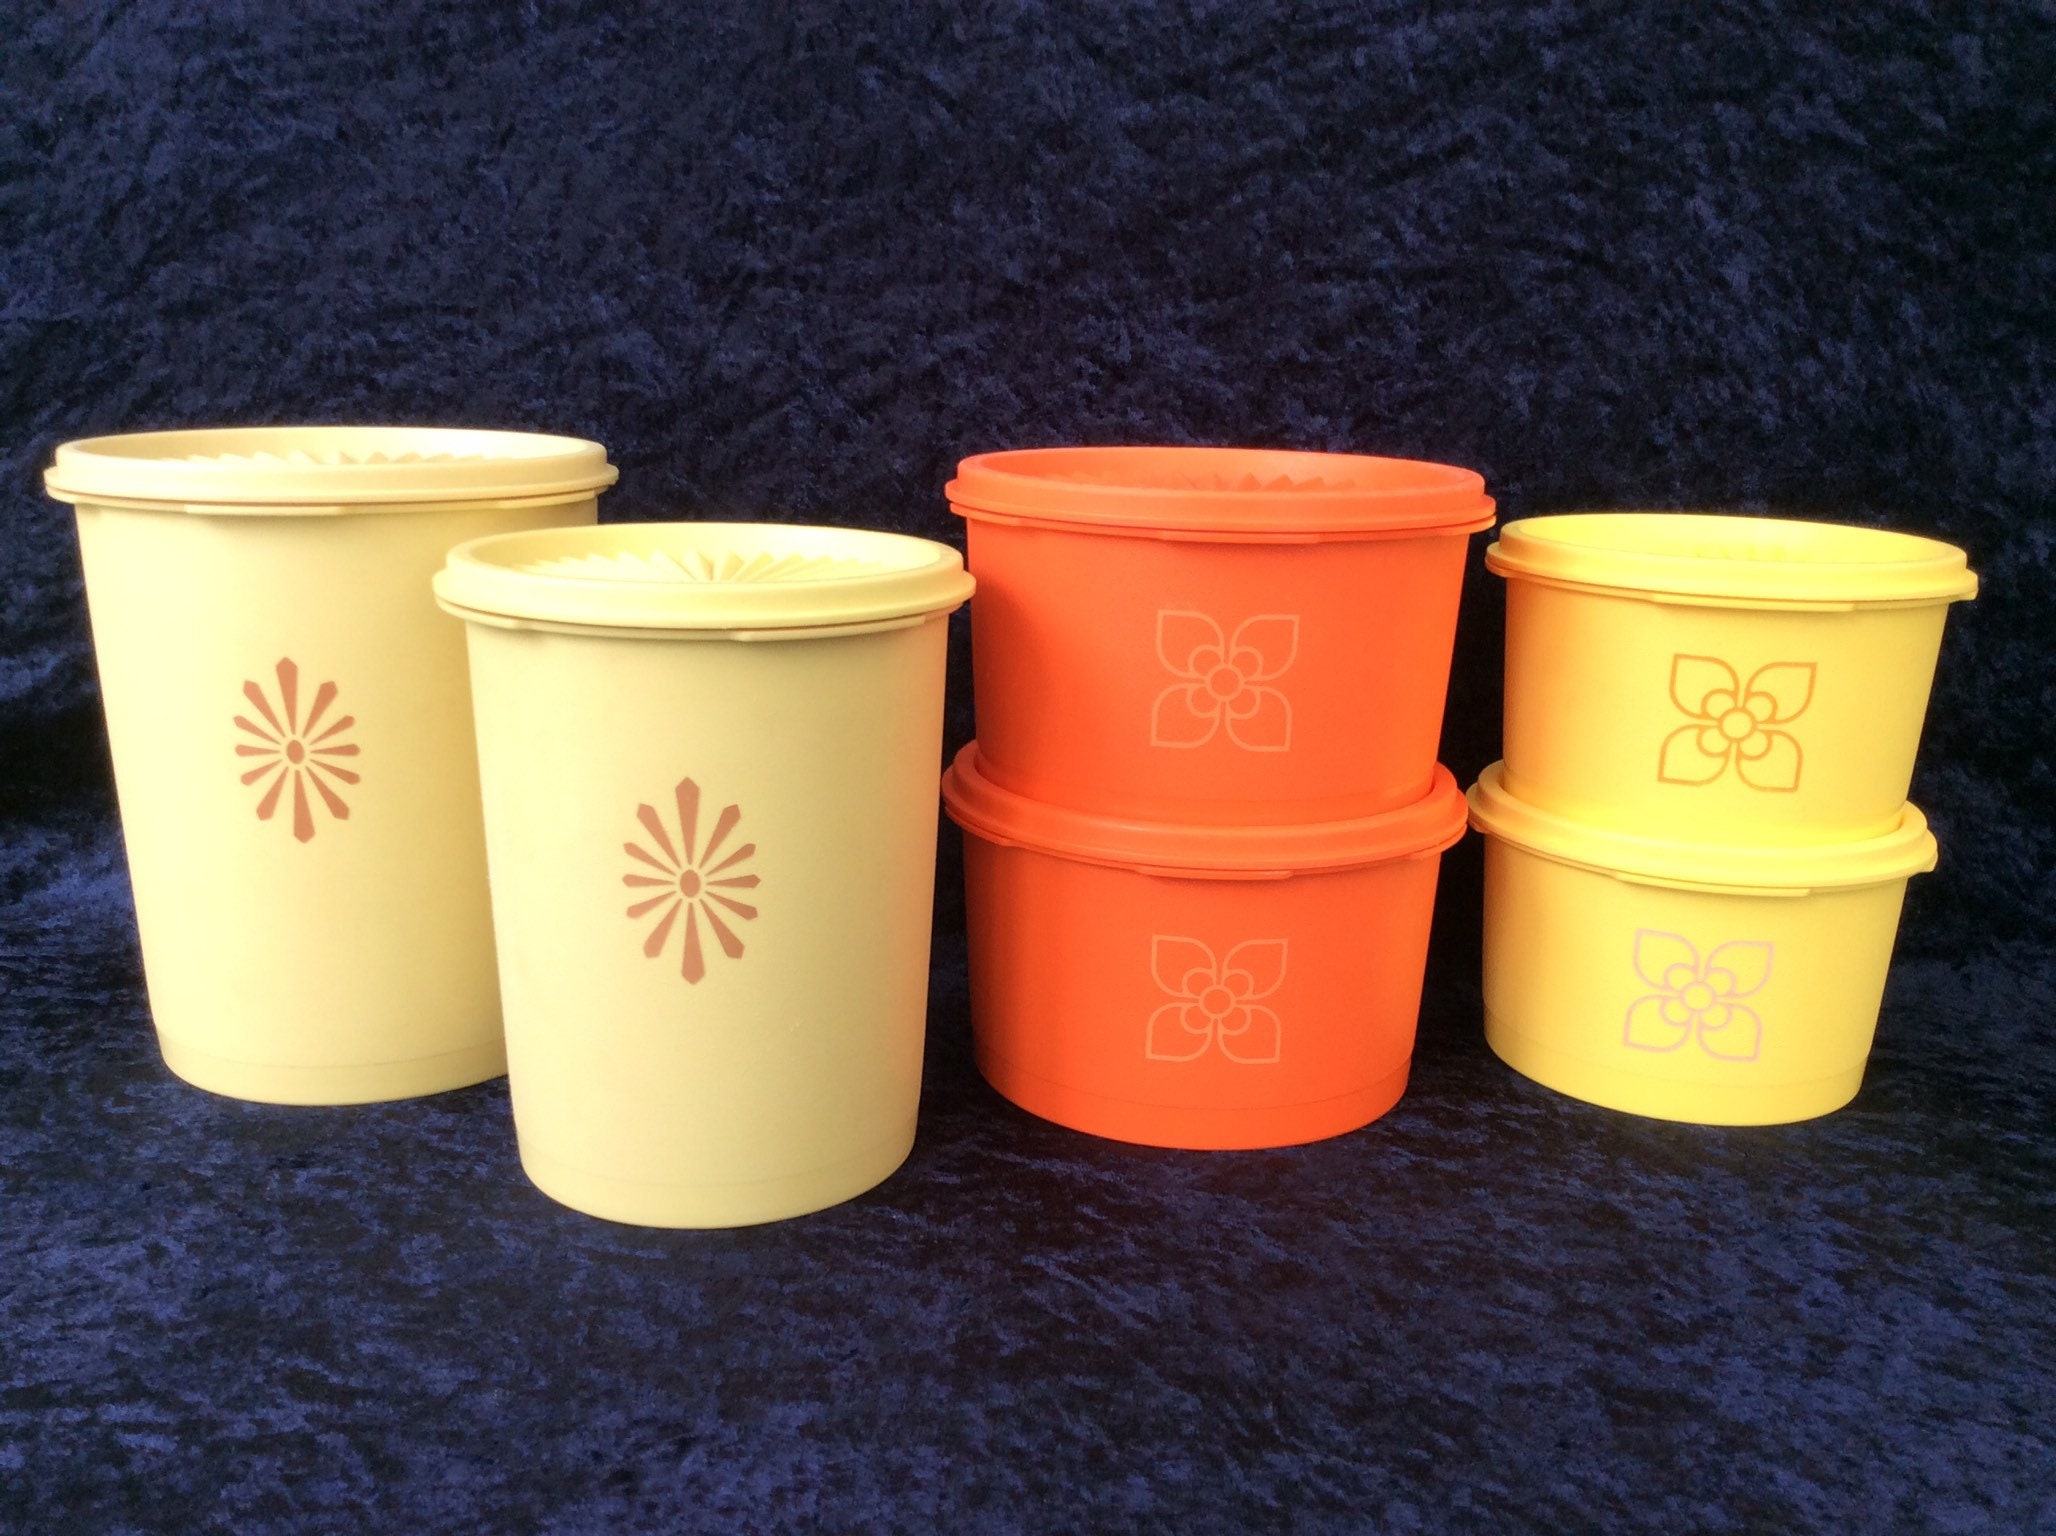 17 Vintage Tupperware Canisters and Lids Tupperware Measuring Cups Orange  Tupperware Bowl Yellow Tupperware Modular 70s Tupperware Set 